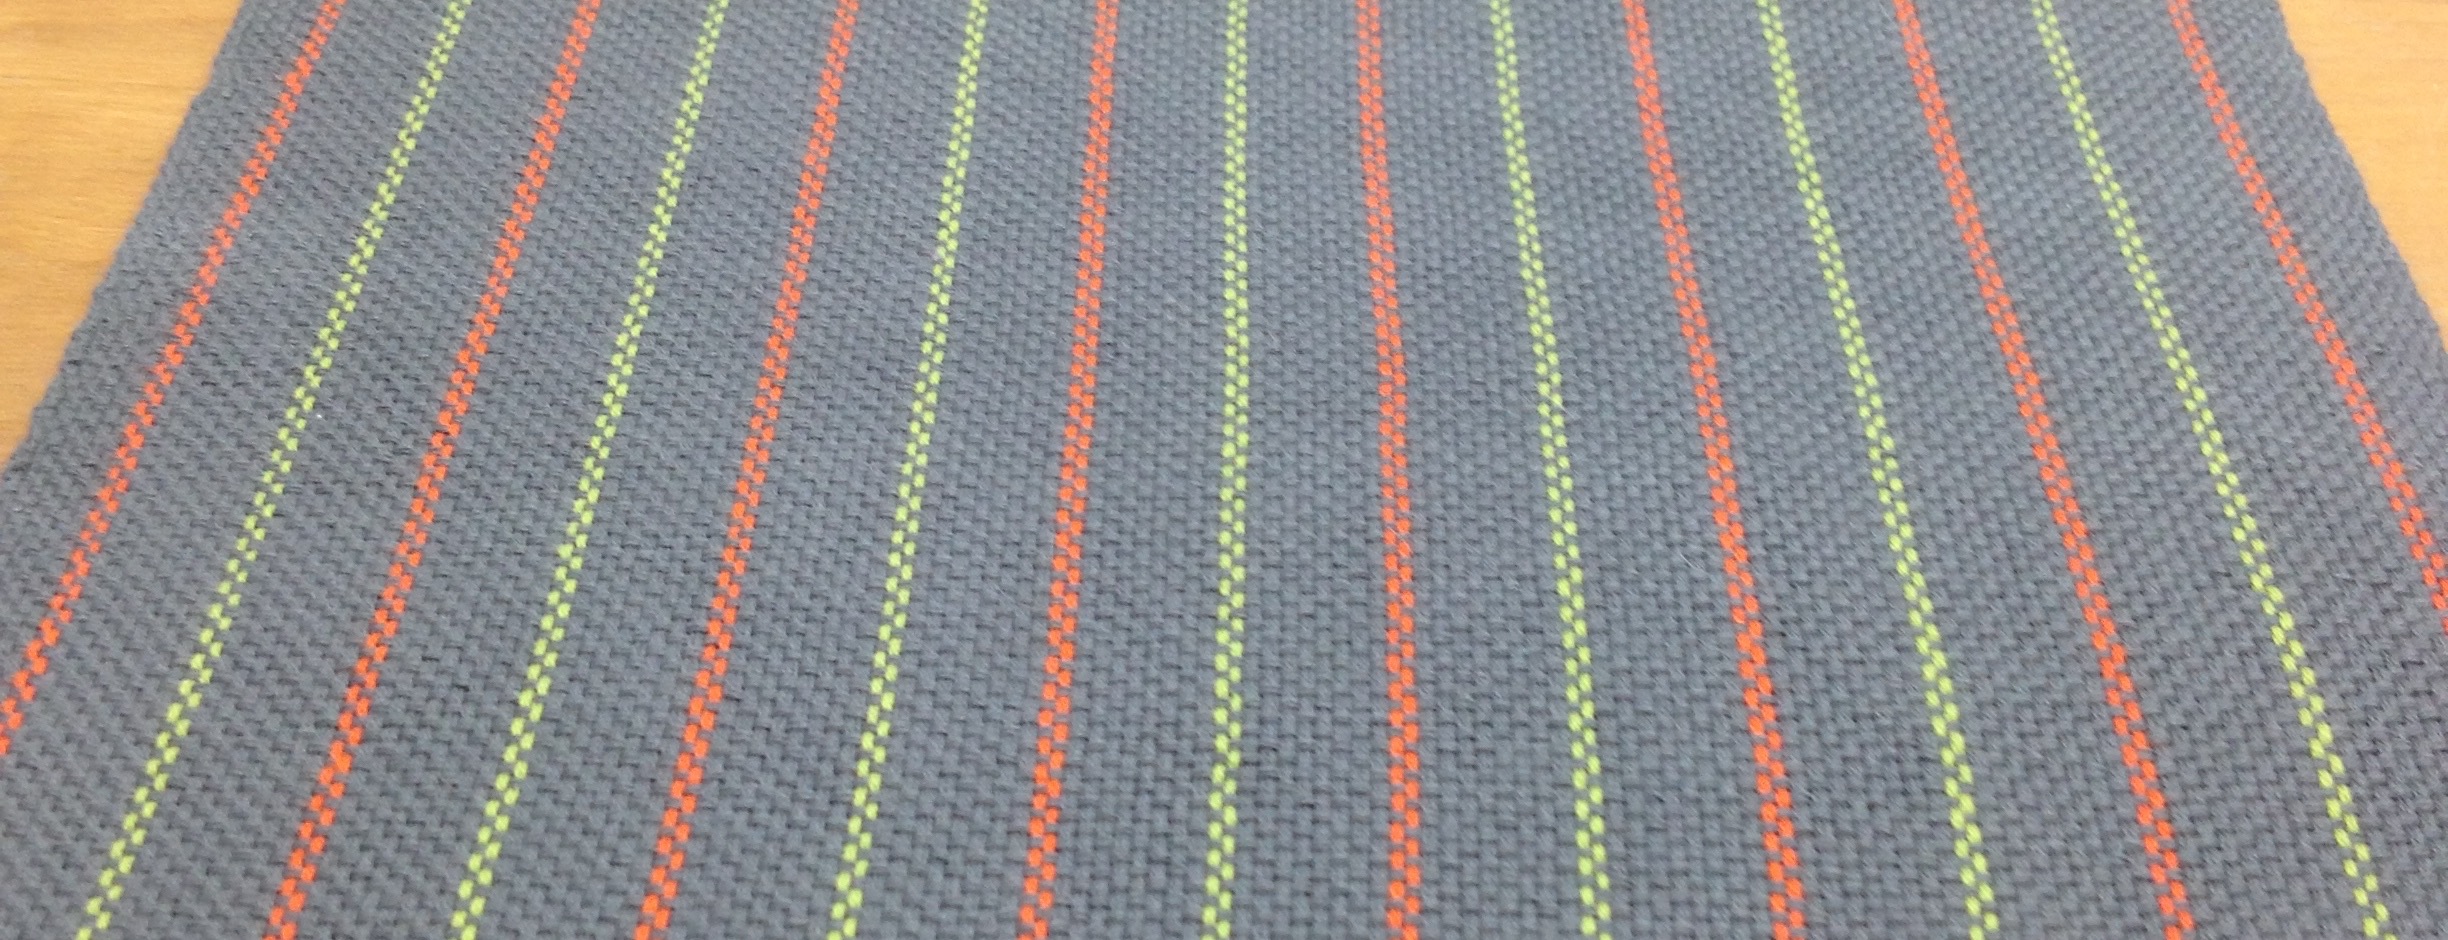 This is the stripe pattern you are creating, 8 ends grey, 2 bright color.